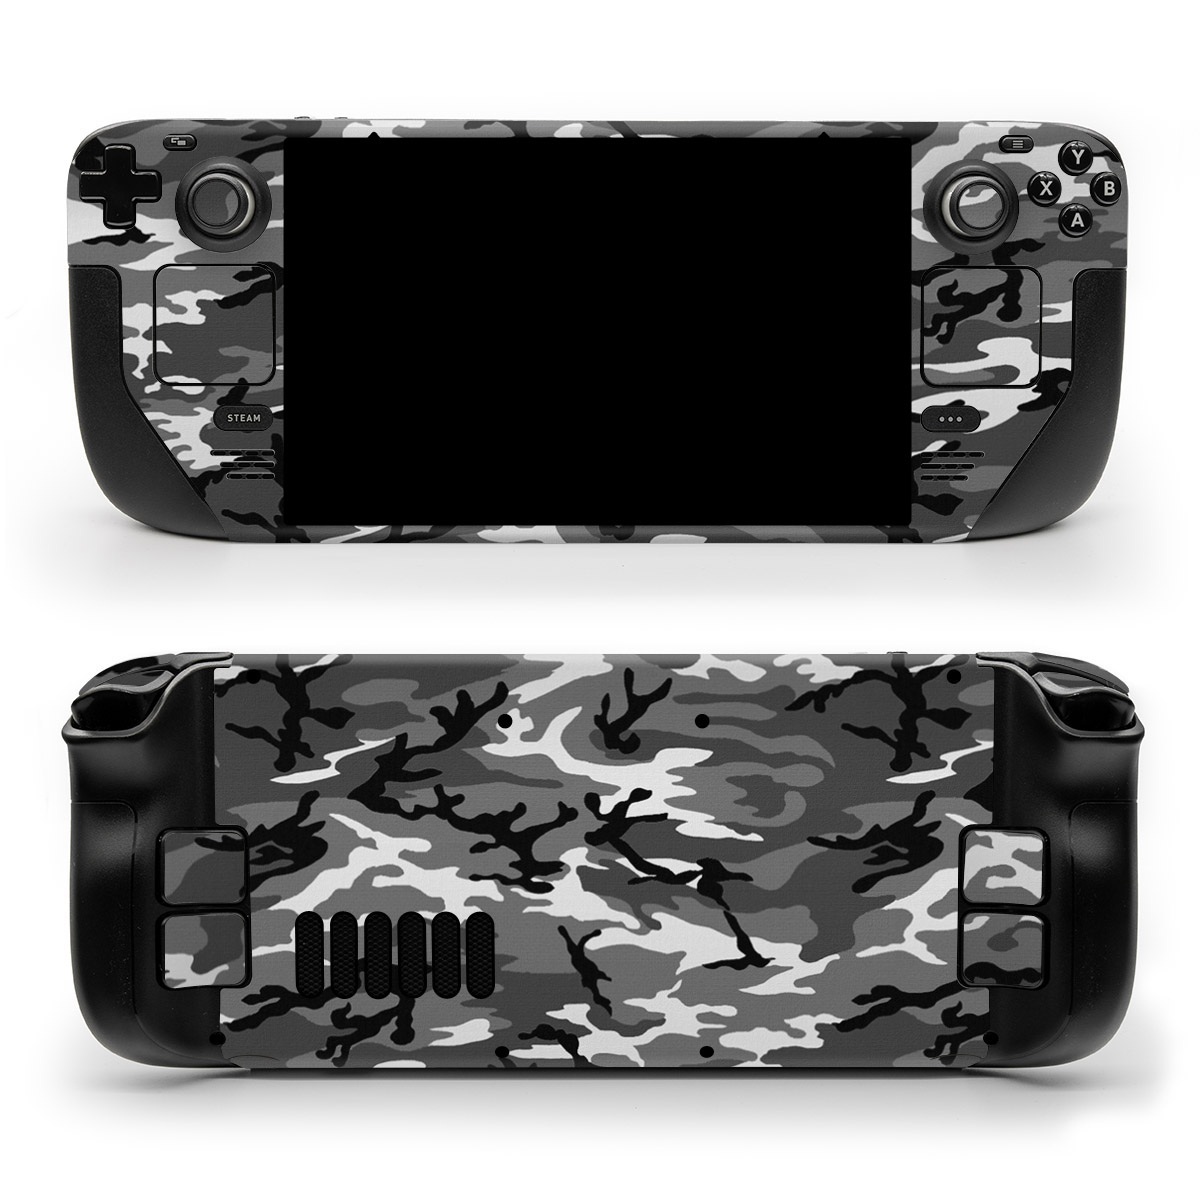 Valve Steam Deck Skin design of Military camouflage, Pattern, Clothing, Camouflage, Uniform, Design, Textile, with black, gray colors